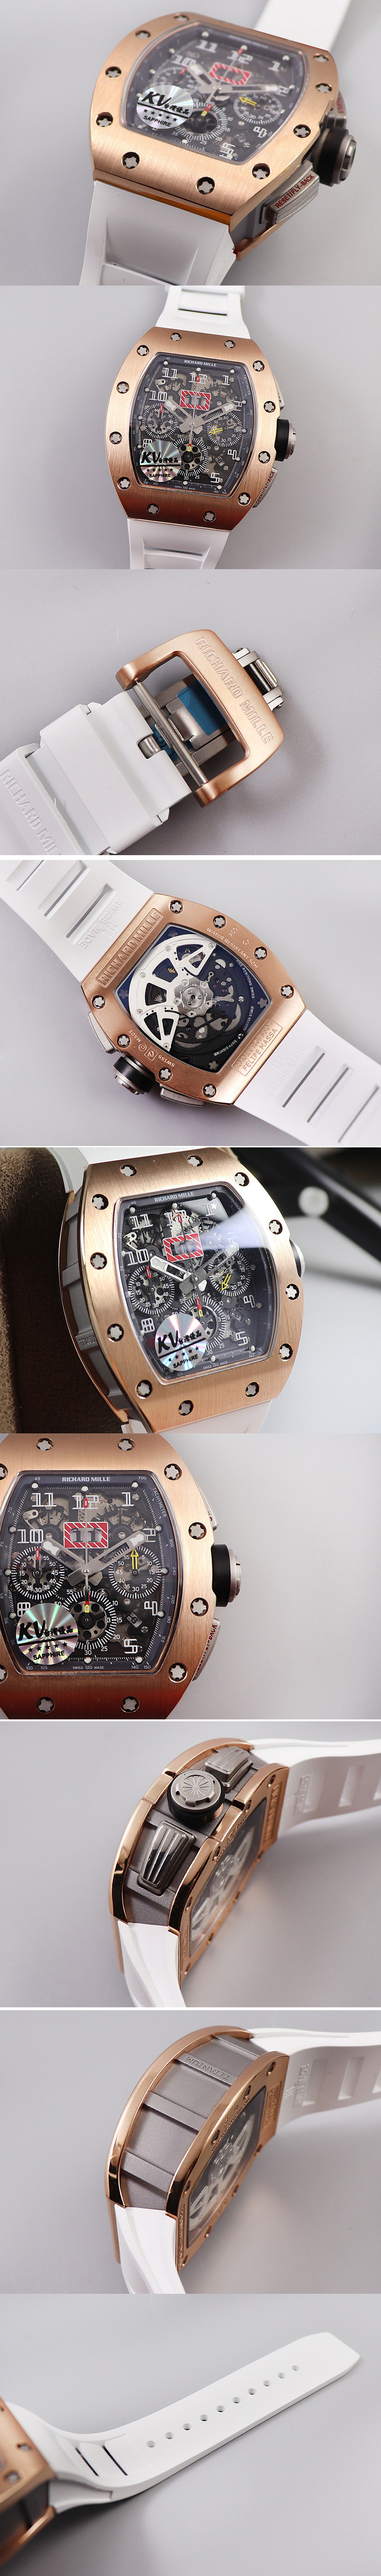 Replica Richard Mille RM011 RG Chrono KVF 1:1 Best Edition Crystal Dial Black on White Rubber Strap A7750